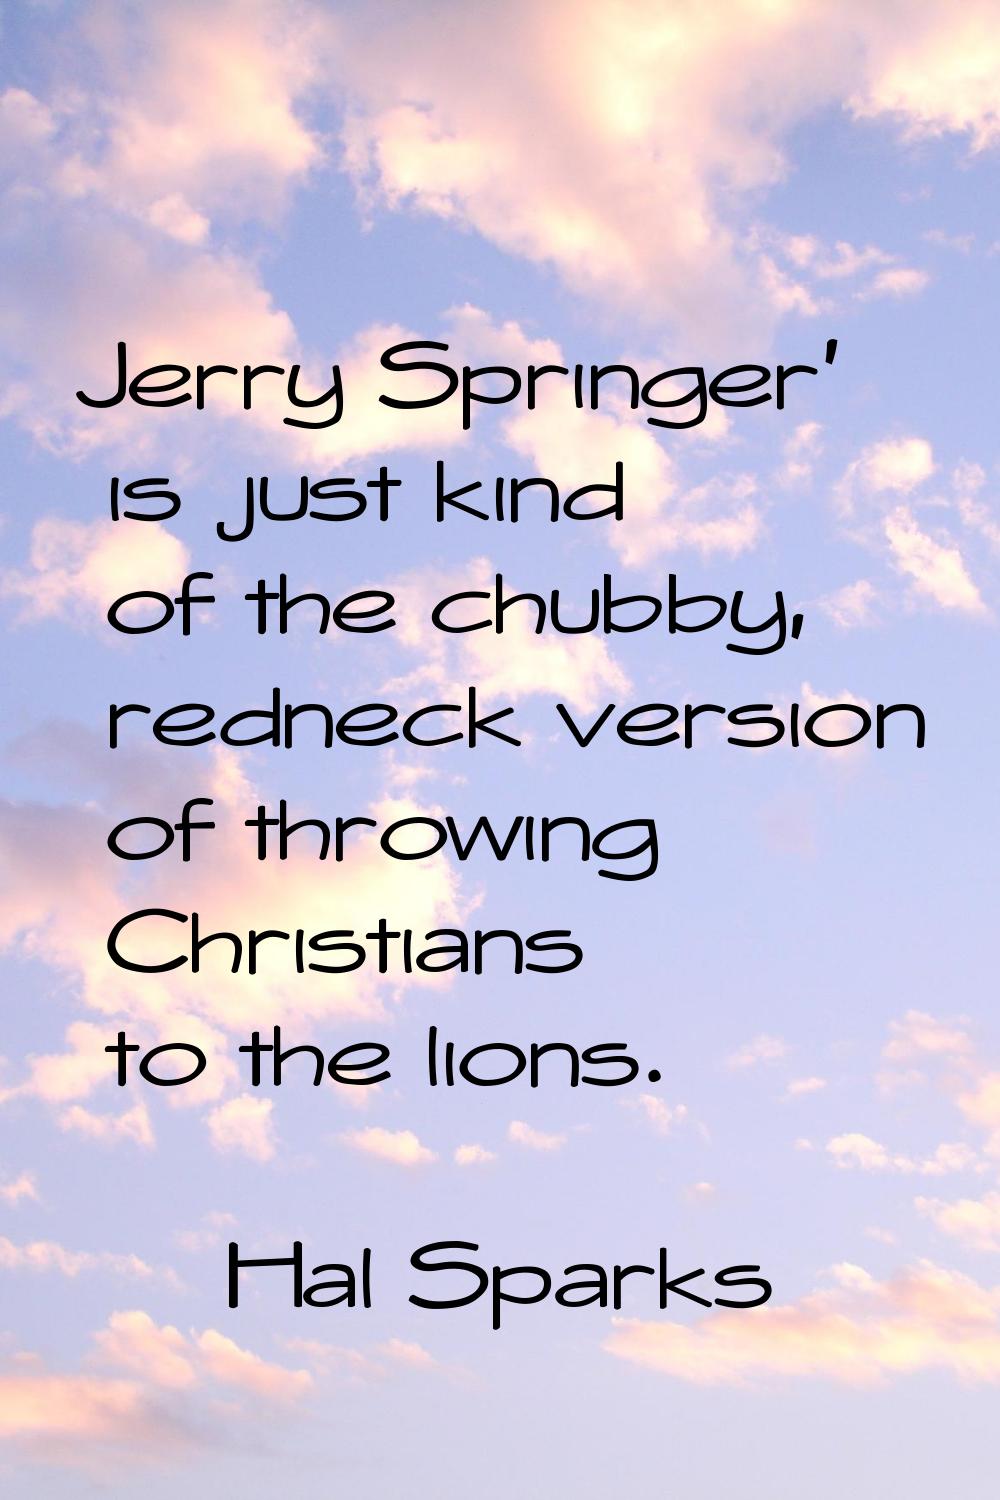 Jerry Springer' is just kind of the chubby, redneck version of throwing Christians to the lions.